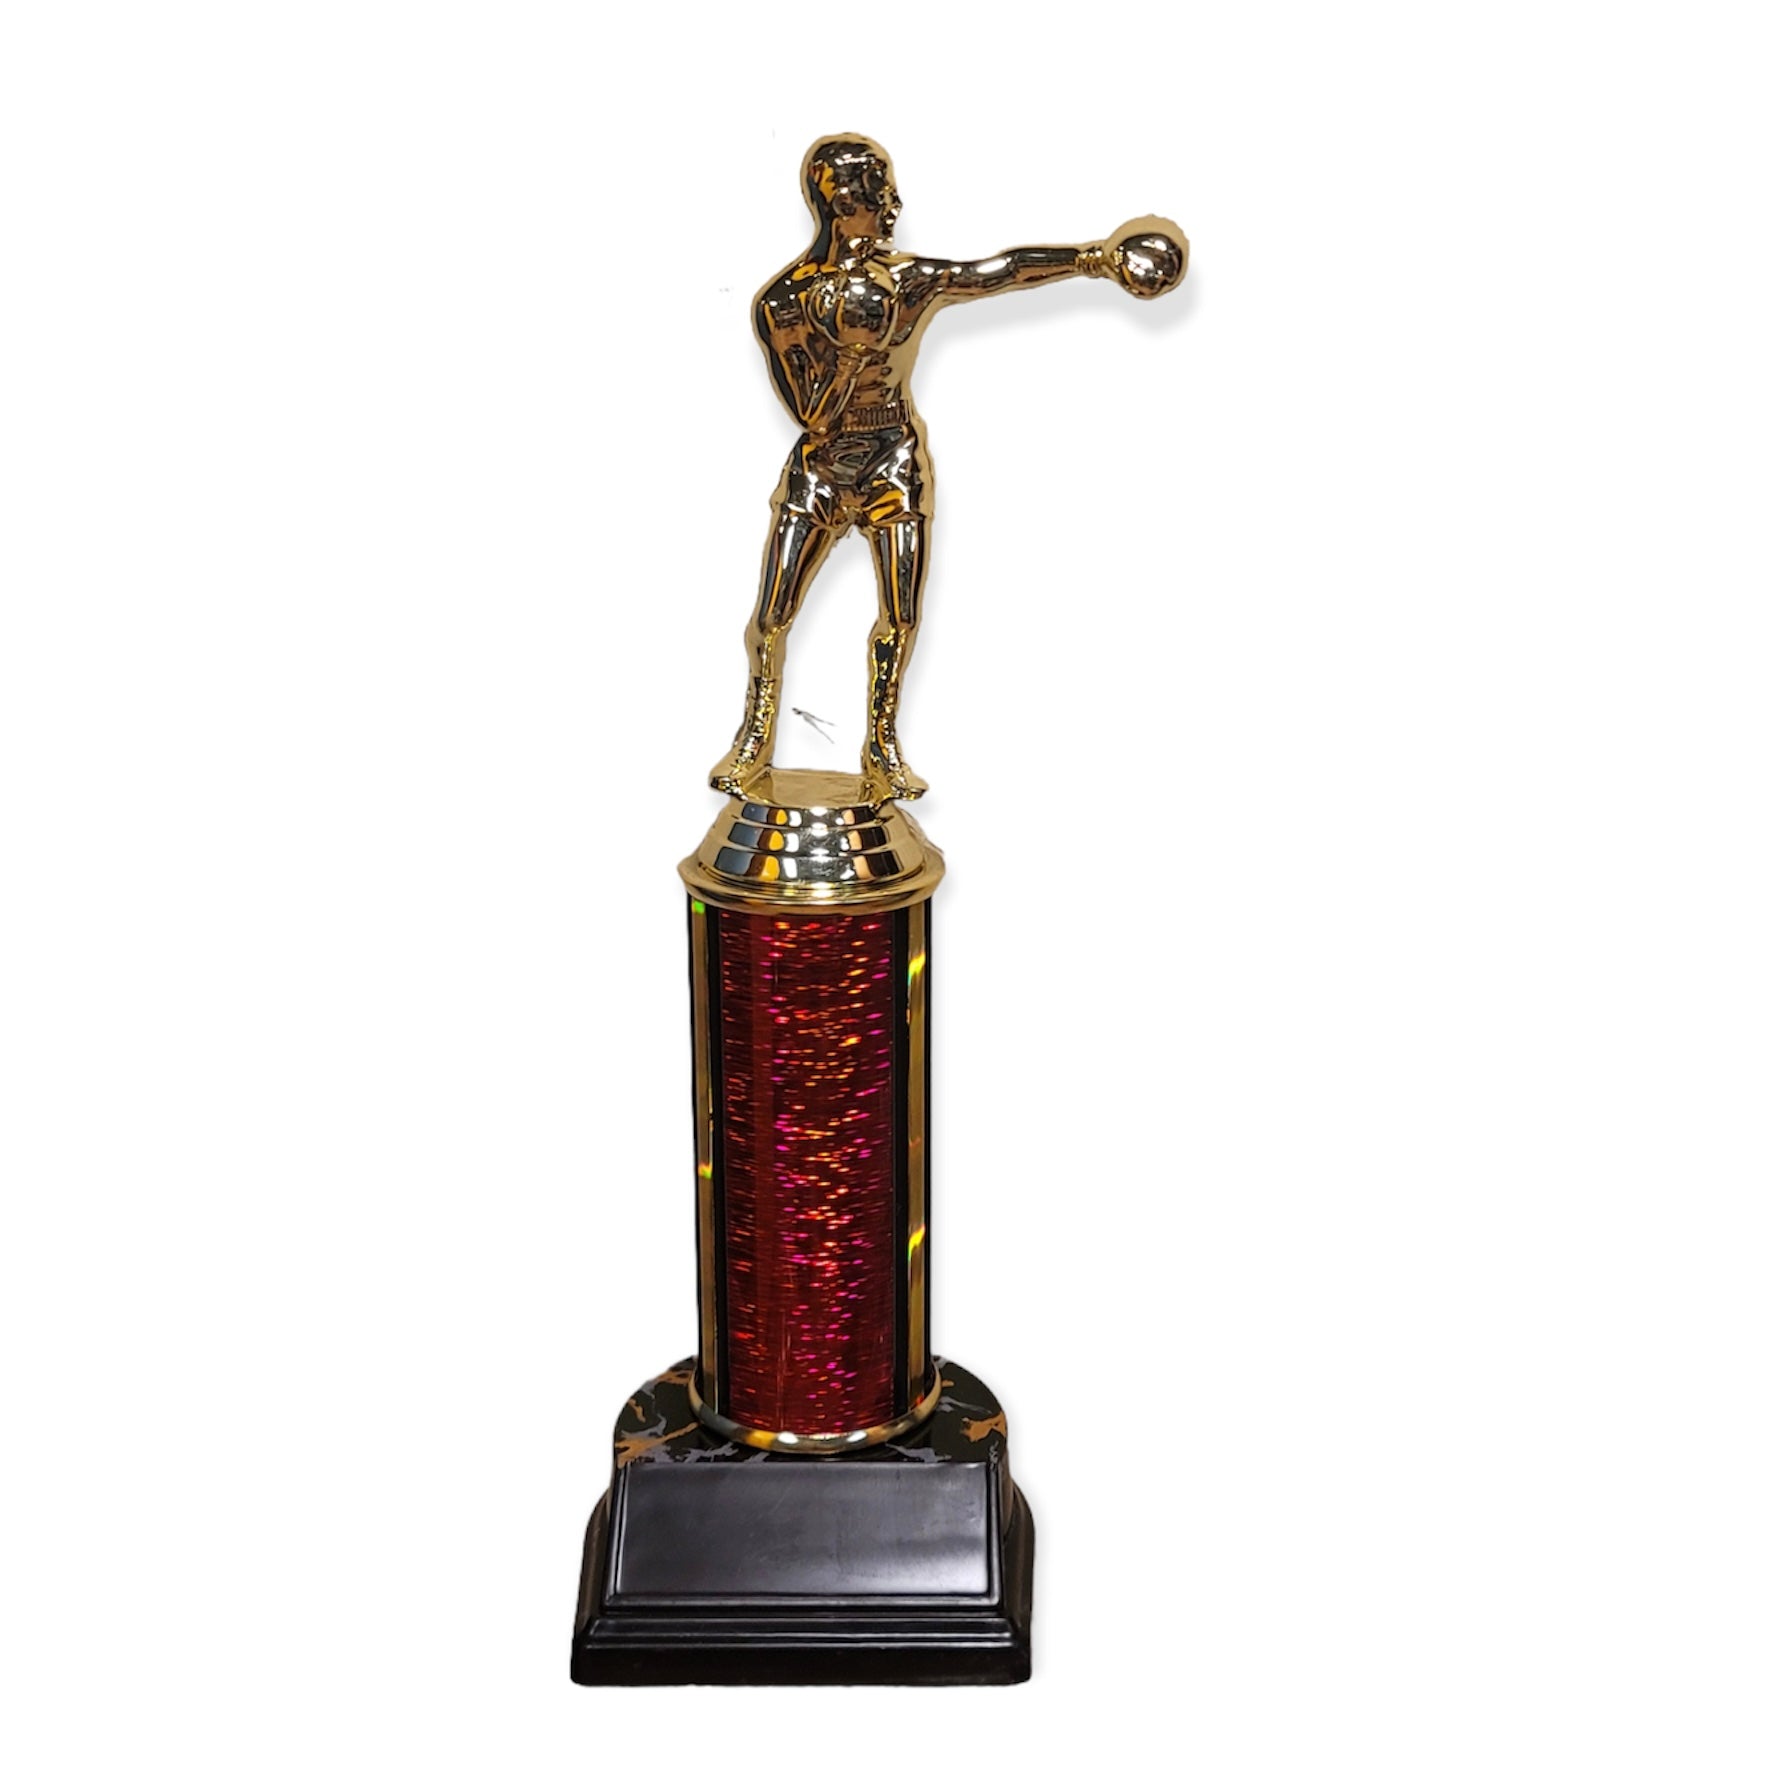 boxer fighting trophy with free engraved plate